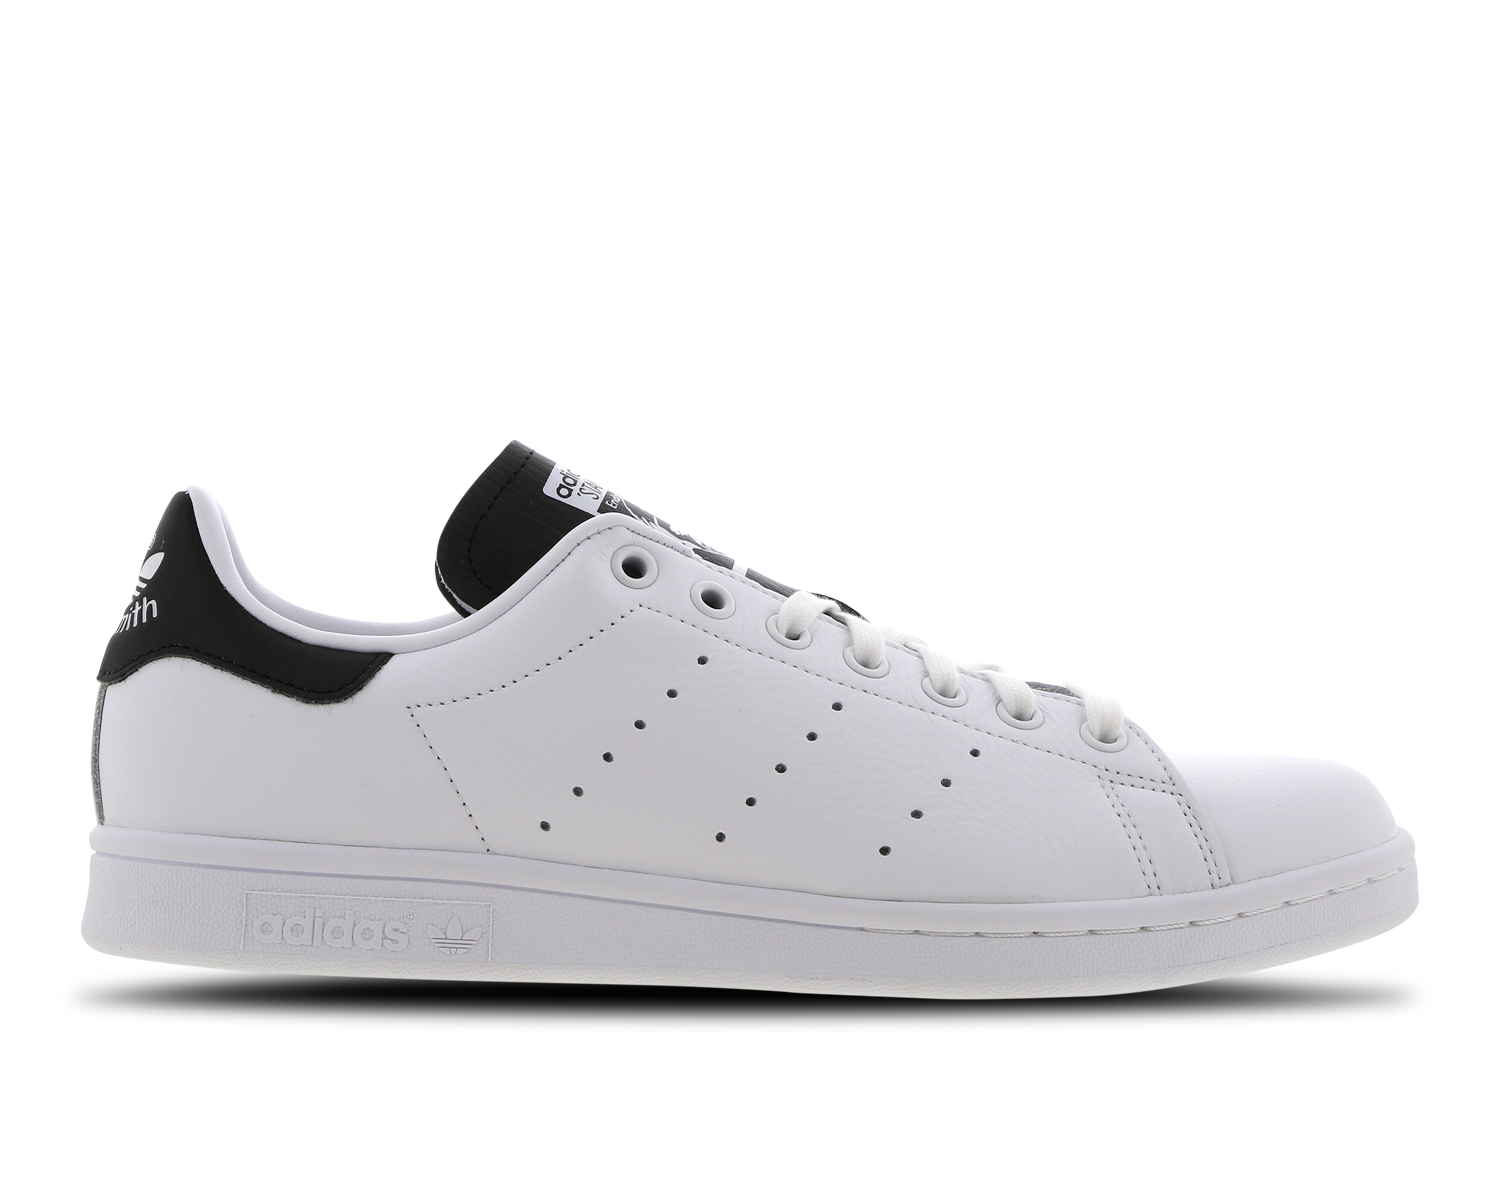 stan smith homme rouge et blanc